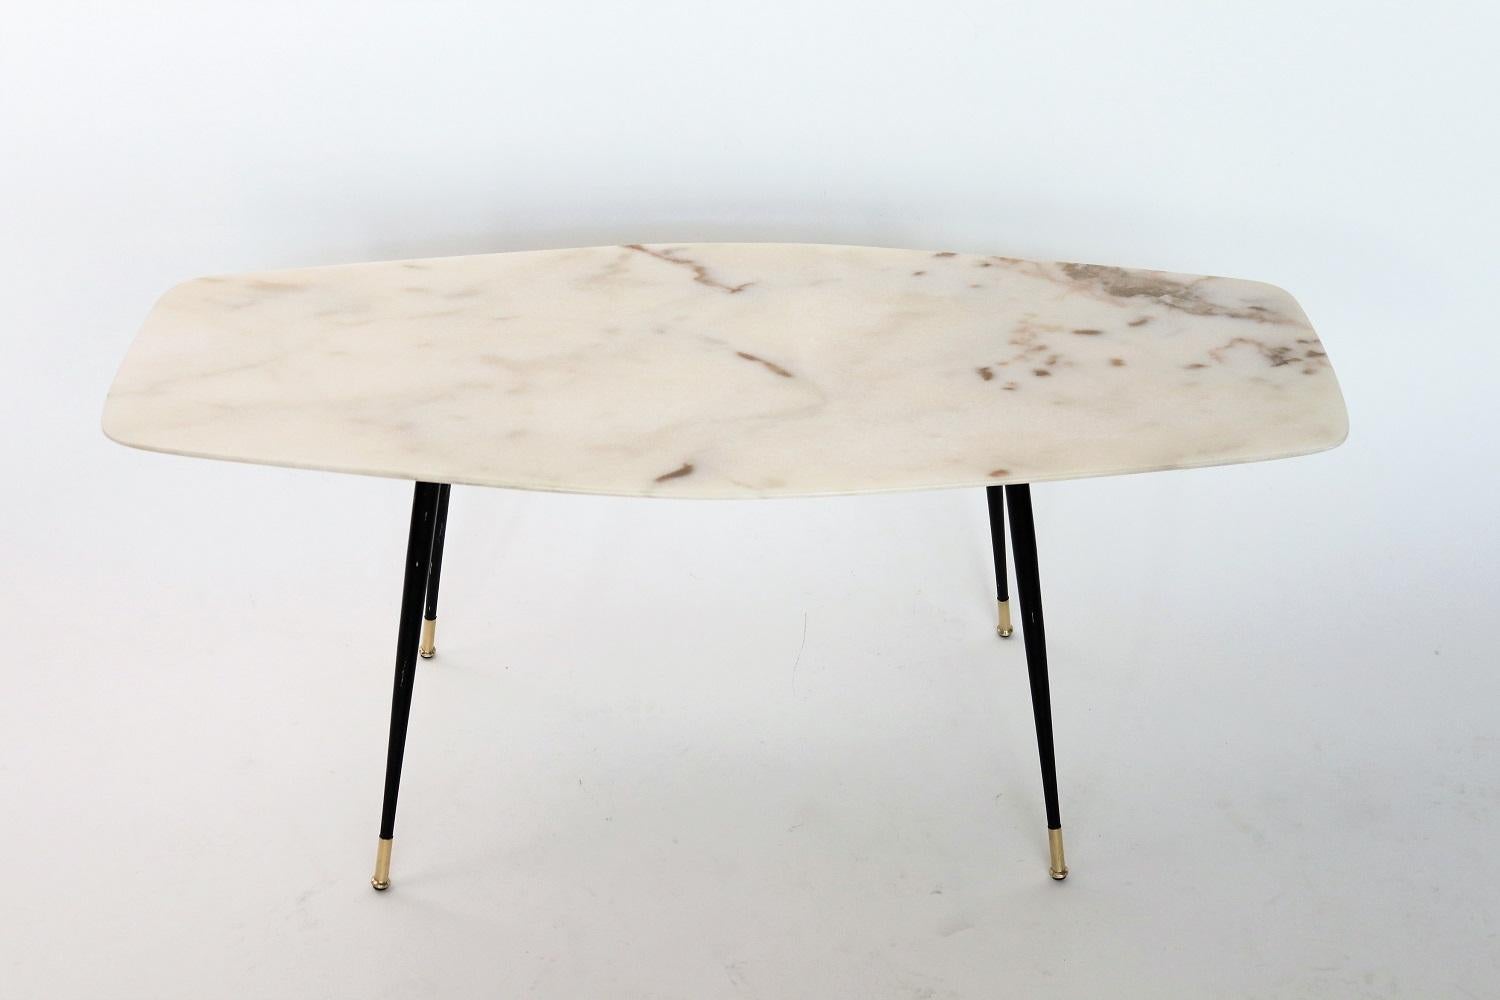 Beautiful coffee table with gorgeous elegant pink/light grey marble top and Stiletto brass tips.
Made in Italy during the 1950s.
The marble is called 